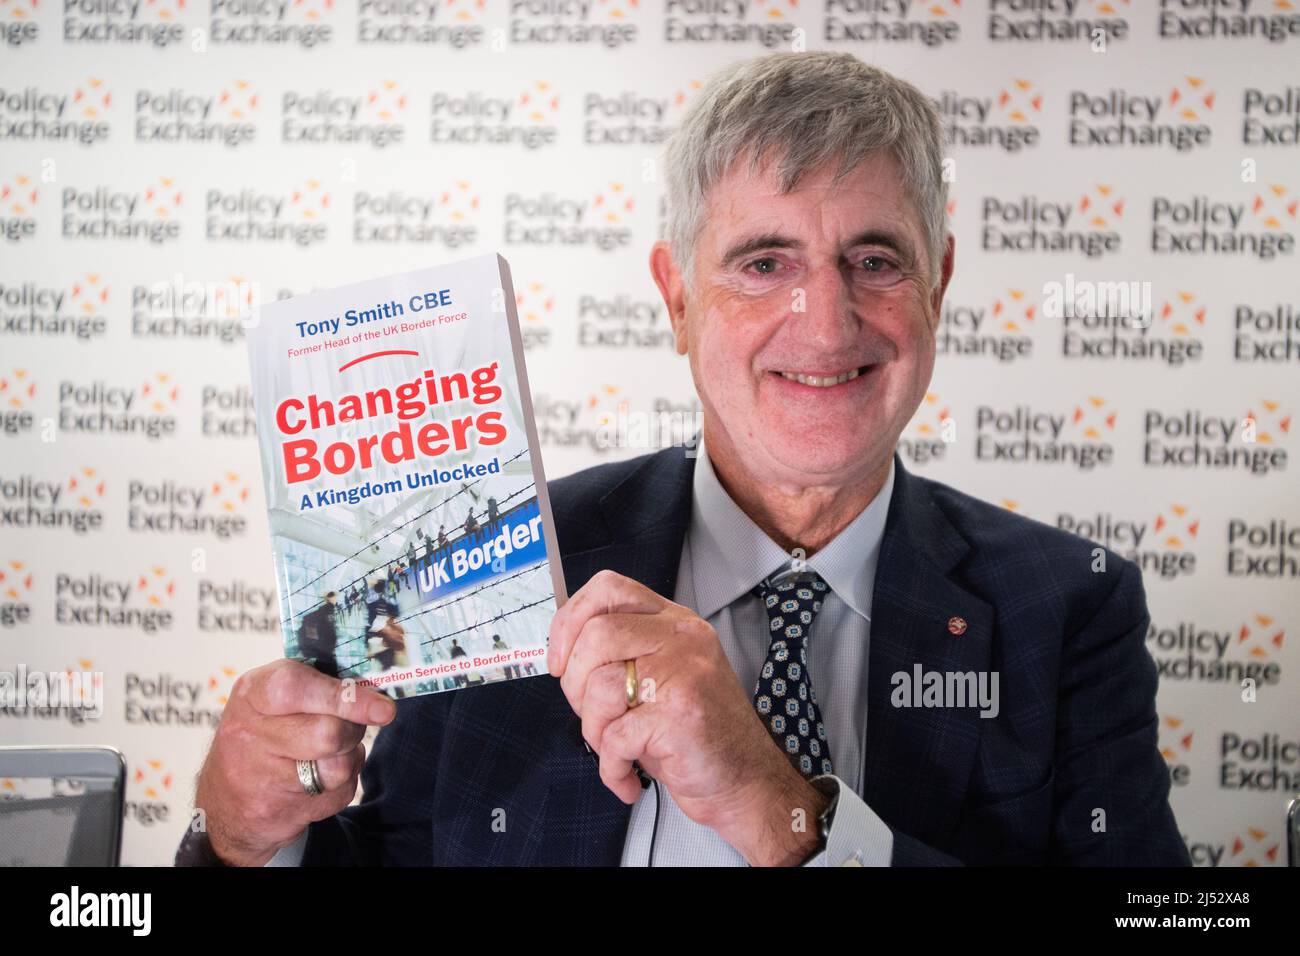 London, UK. 19th Apr, 2022. Tony Smith CBE.Former Head of UK Border Force, Tony Smith CBE, launches his book CHANGING BORDERS at Policy Exchange with Dennis Goodhart, Glyn Williams, former Director General of Immigration Policy at the Home Office and Nusrat Ghani, Conservative MP for Wealden in East Sussex. Credit: Peter Hogan/Alamy Live News Stock Photo